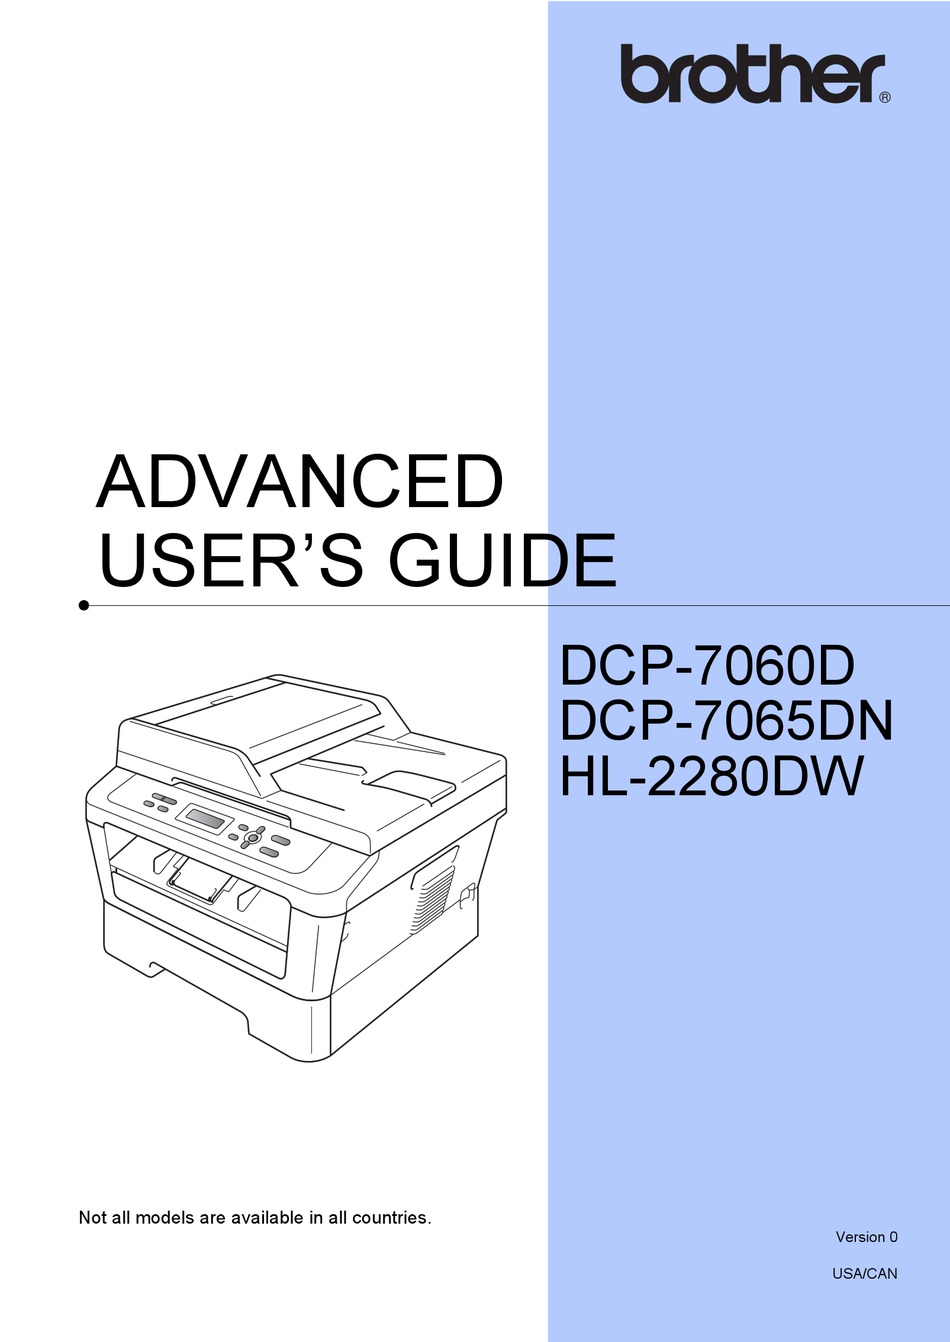 BROTHER DCP 7065DN ADVANCED USER'S MANUAL Pdf Download | ManualsLib